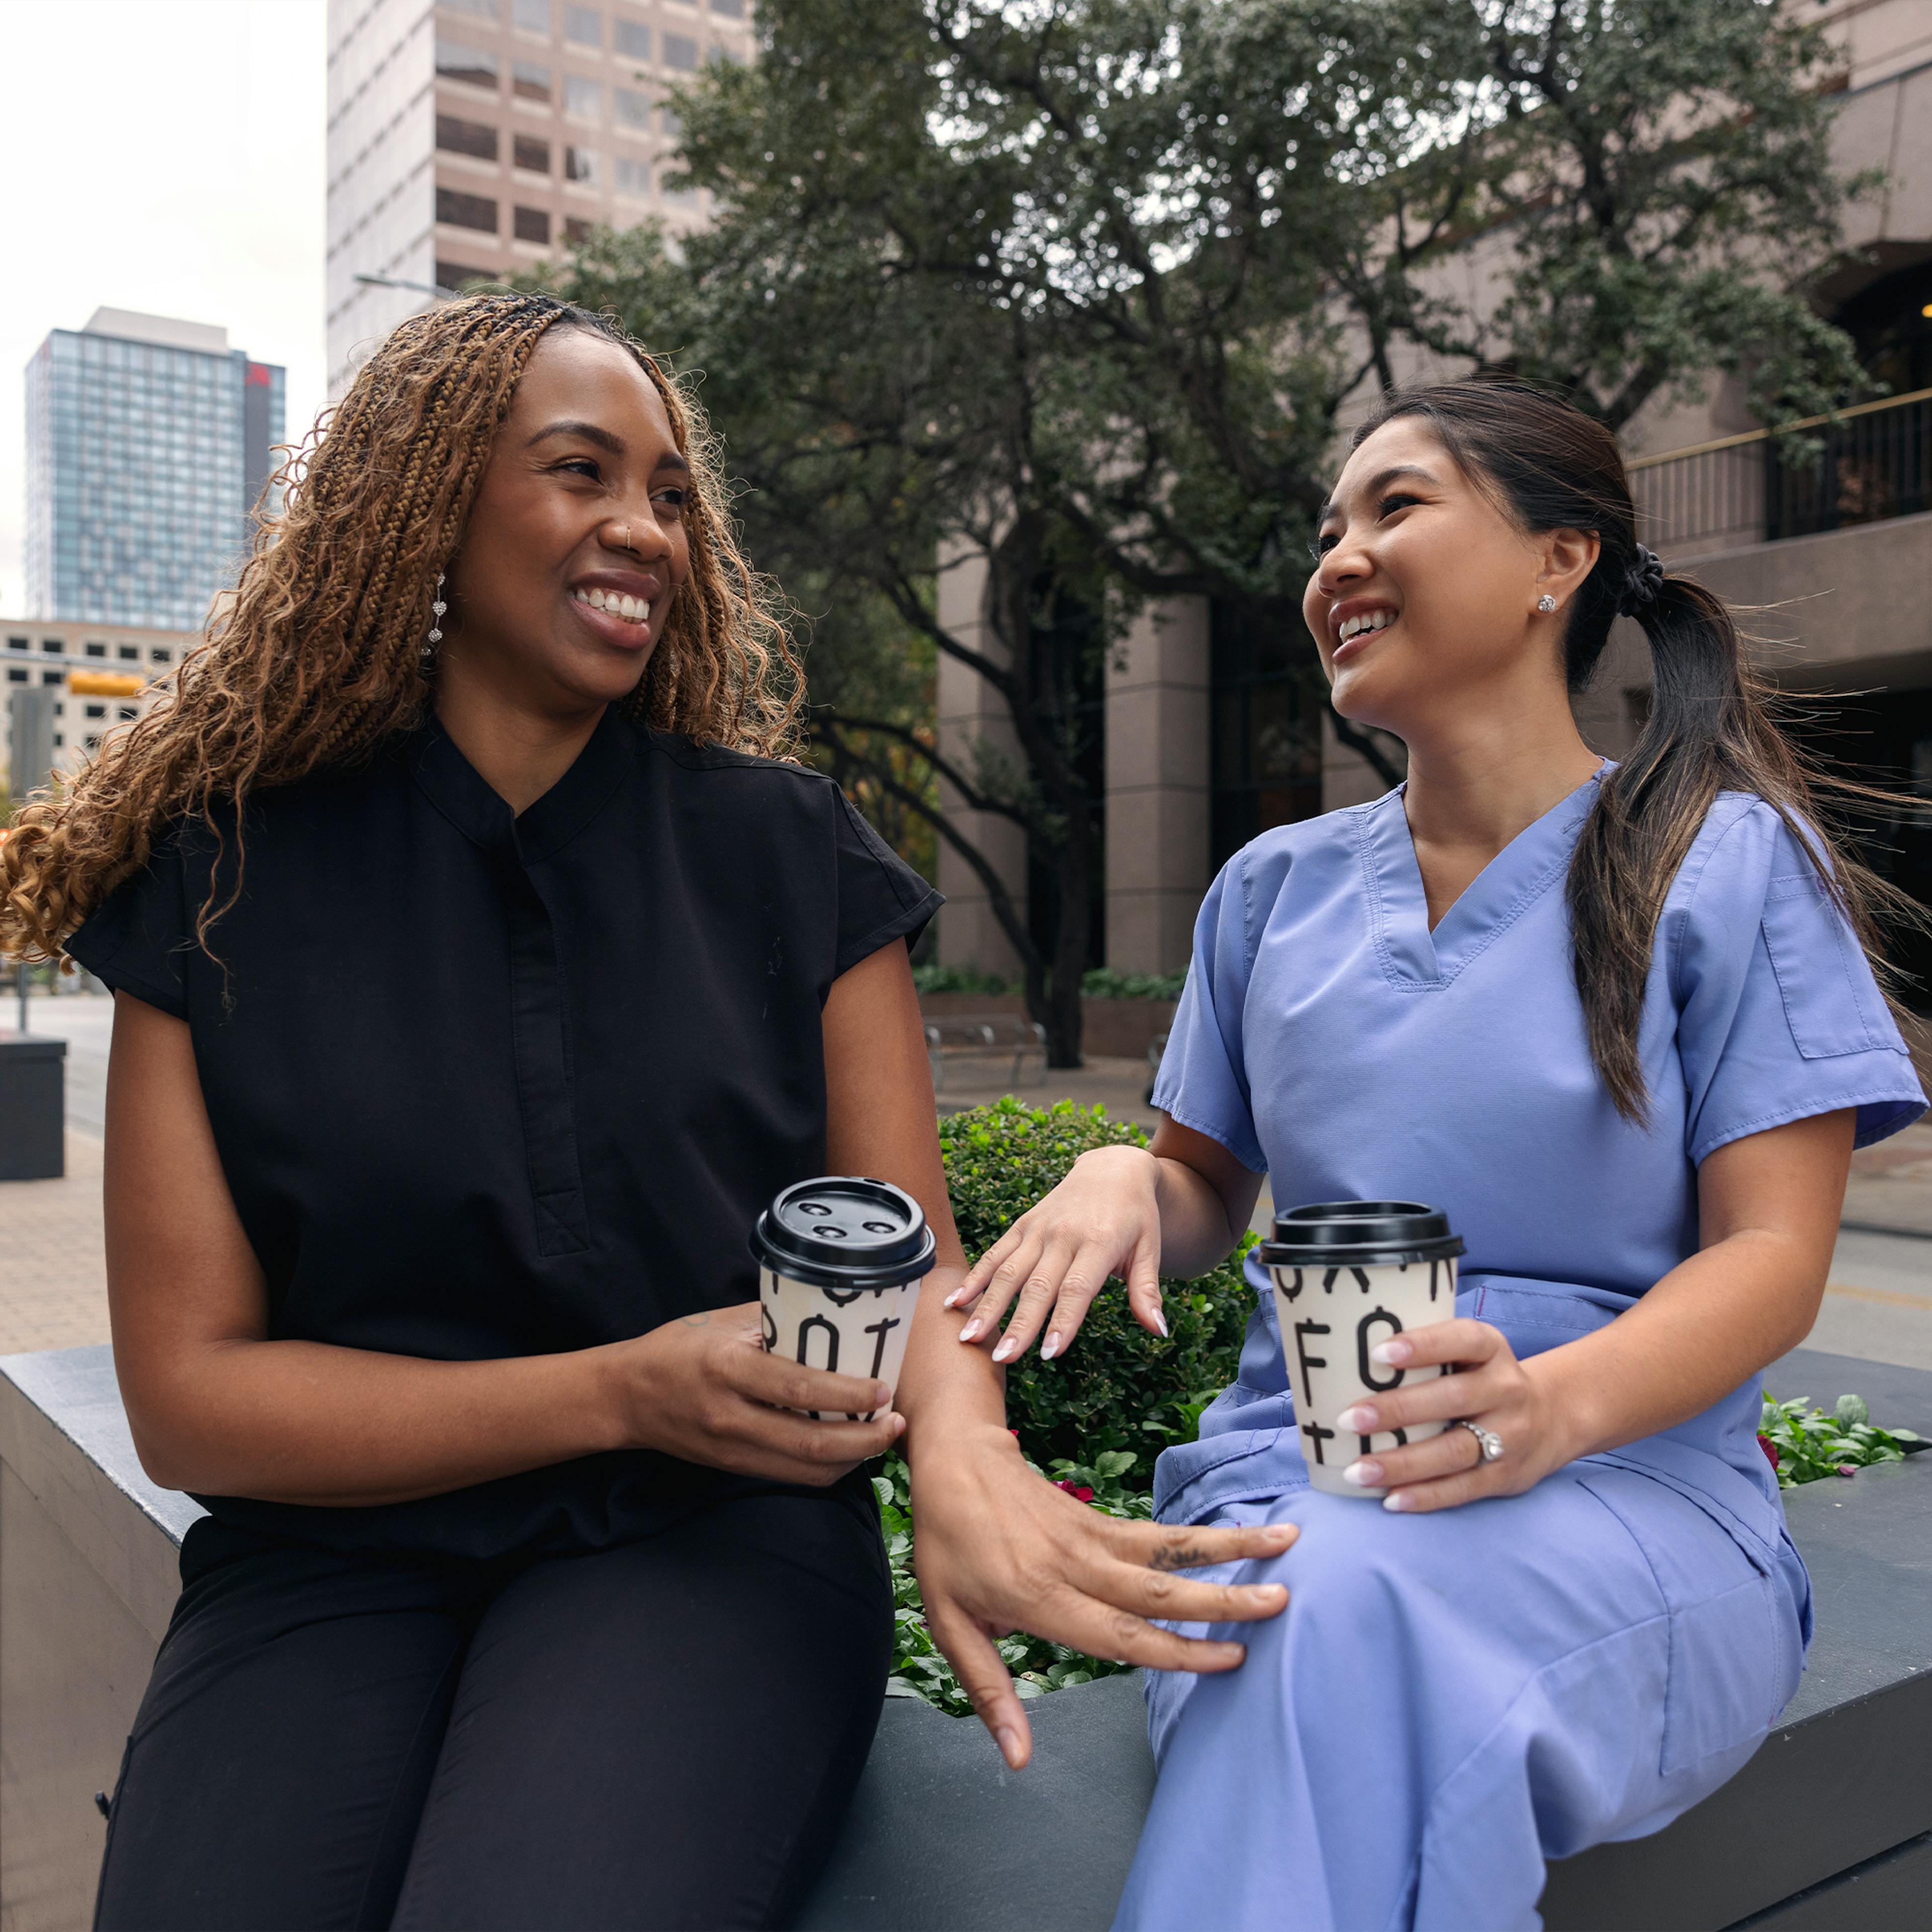 Two nurses enjoying coffee together in downtown area